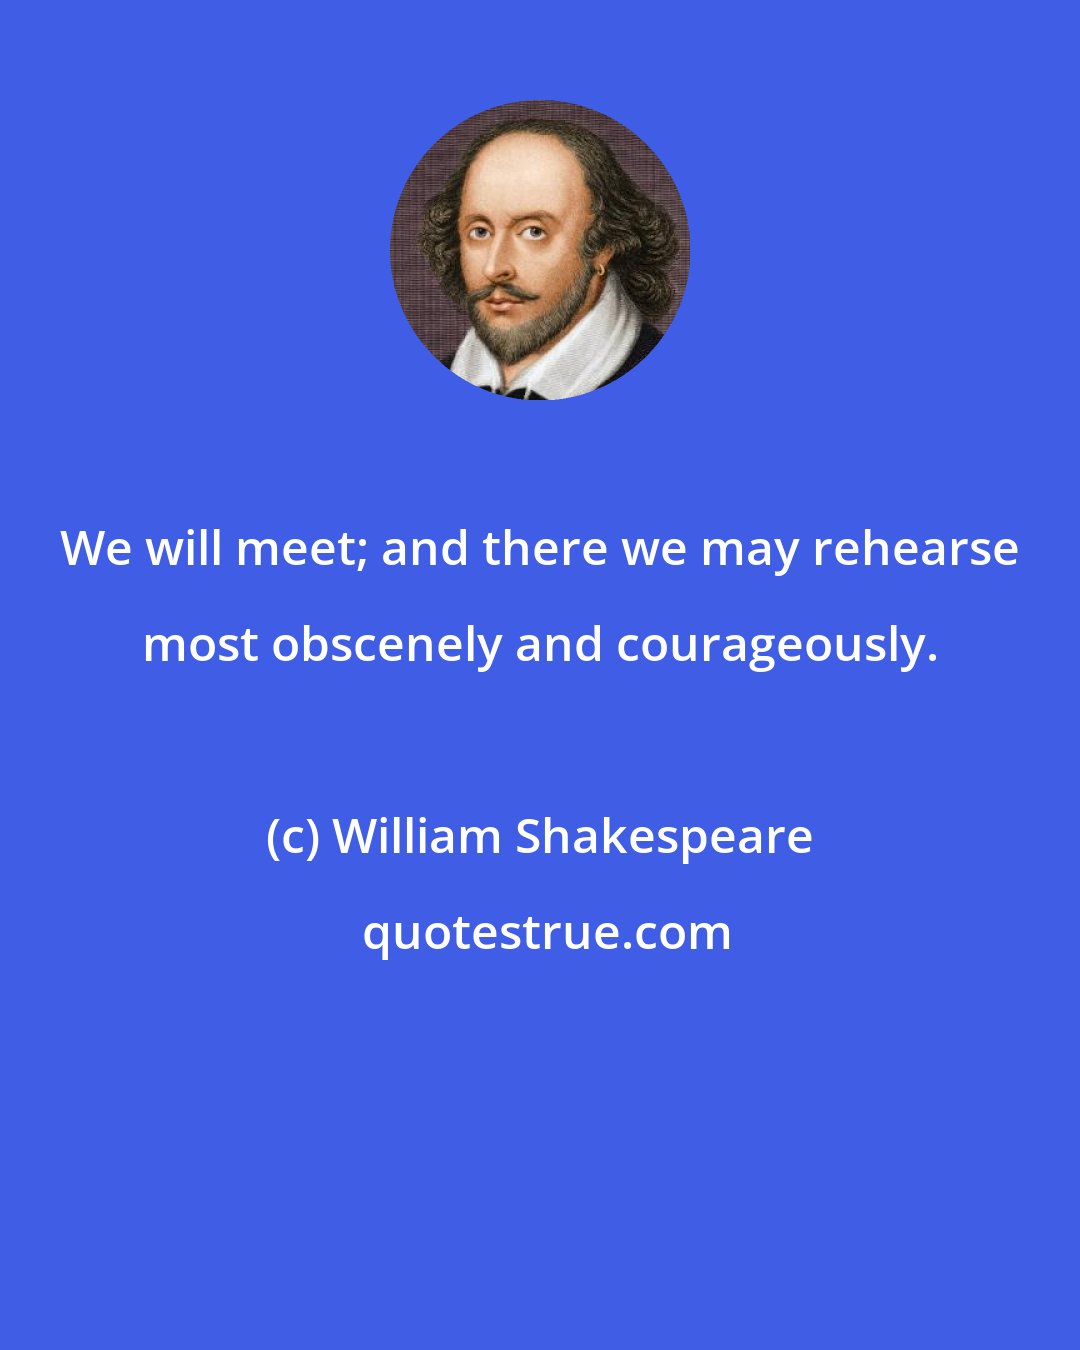 William Shakespeare: We will meet; and there we may rehearse most obscenely and courageously.